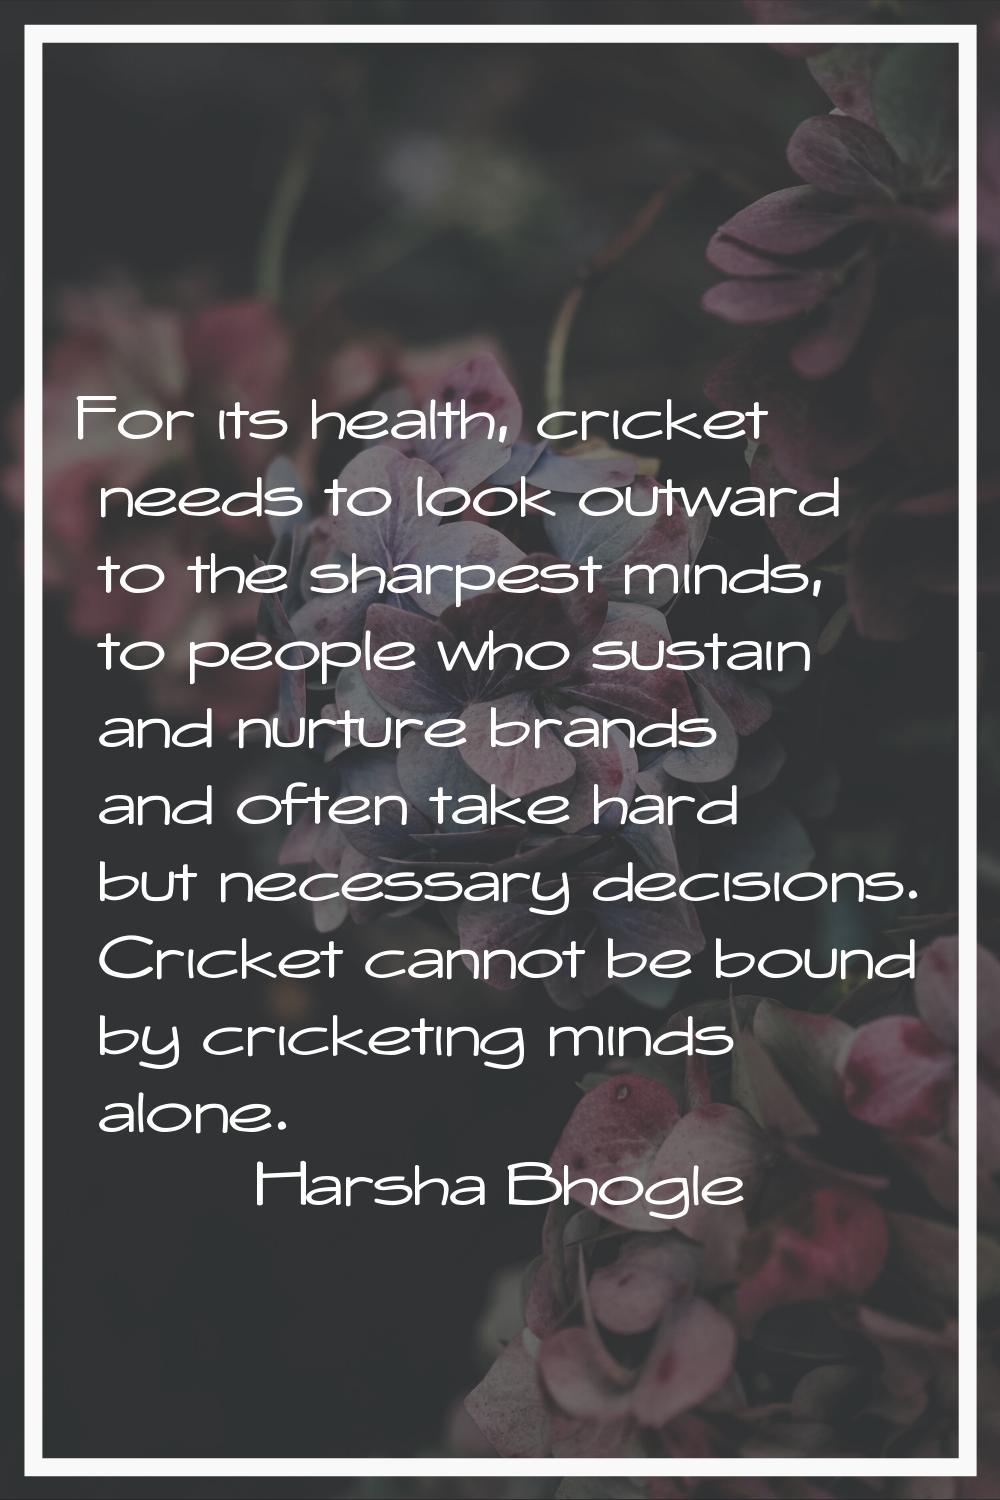 For its health, cricket needs to look outward to the sharpest minds, to people who sustain and nurt